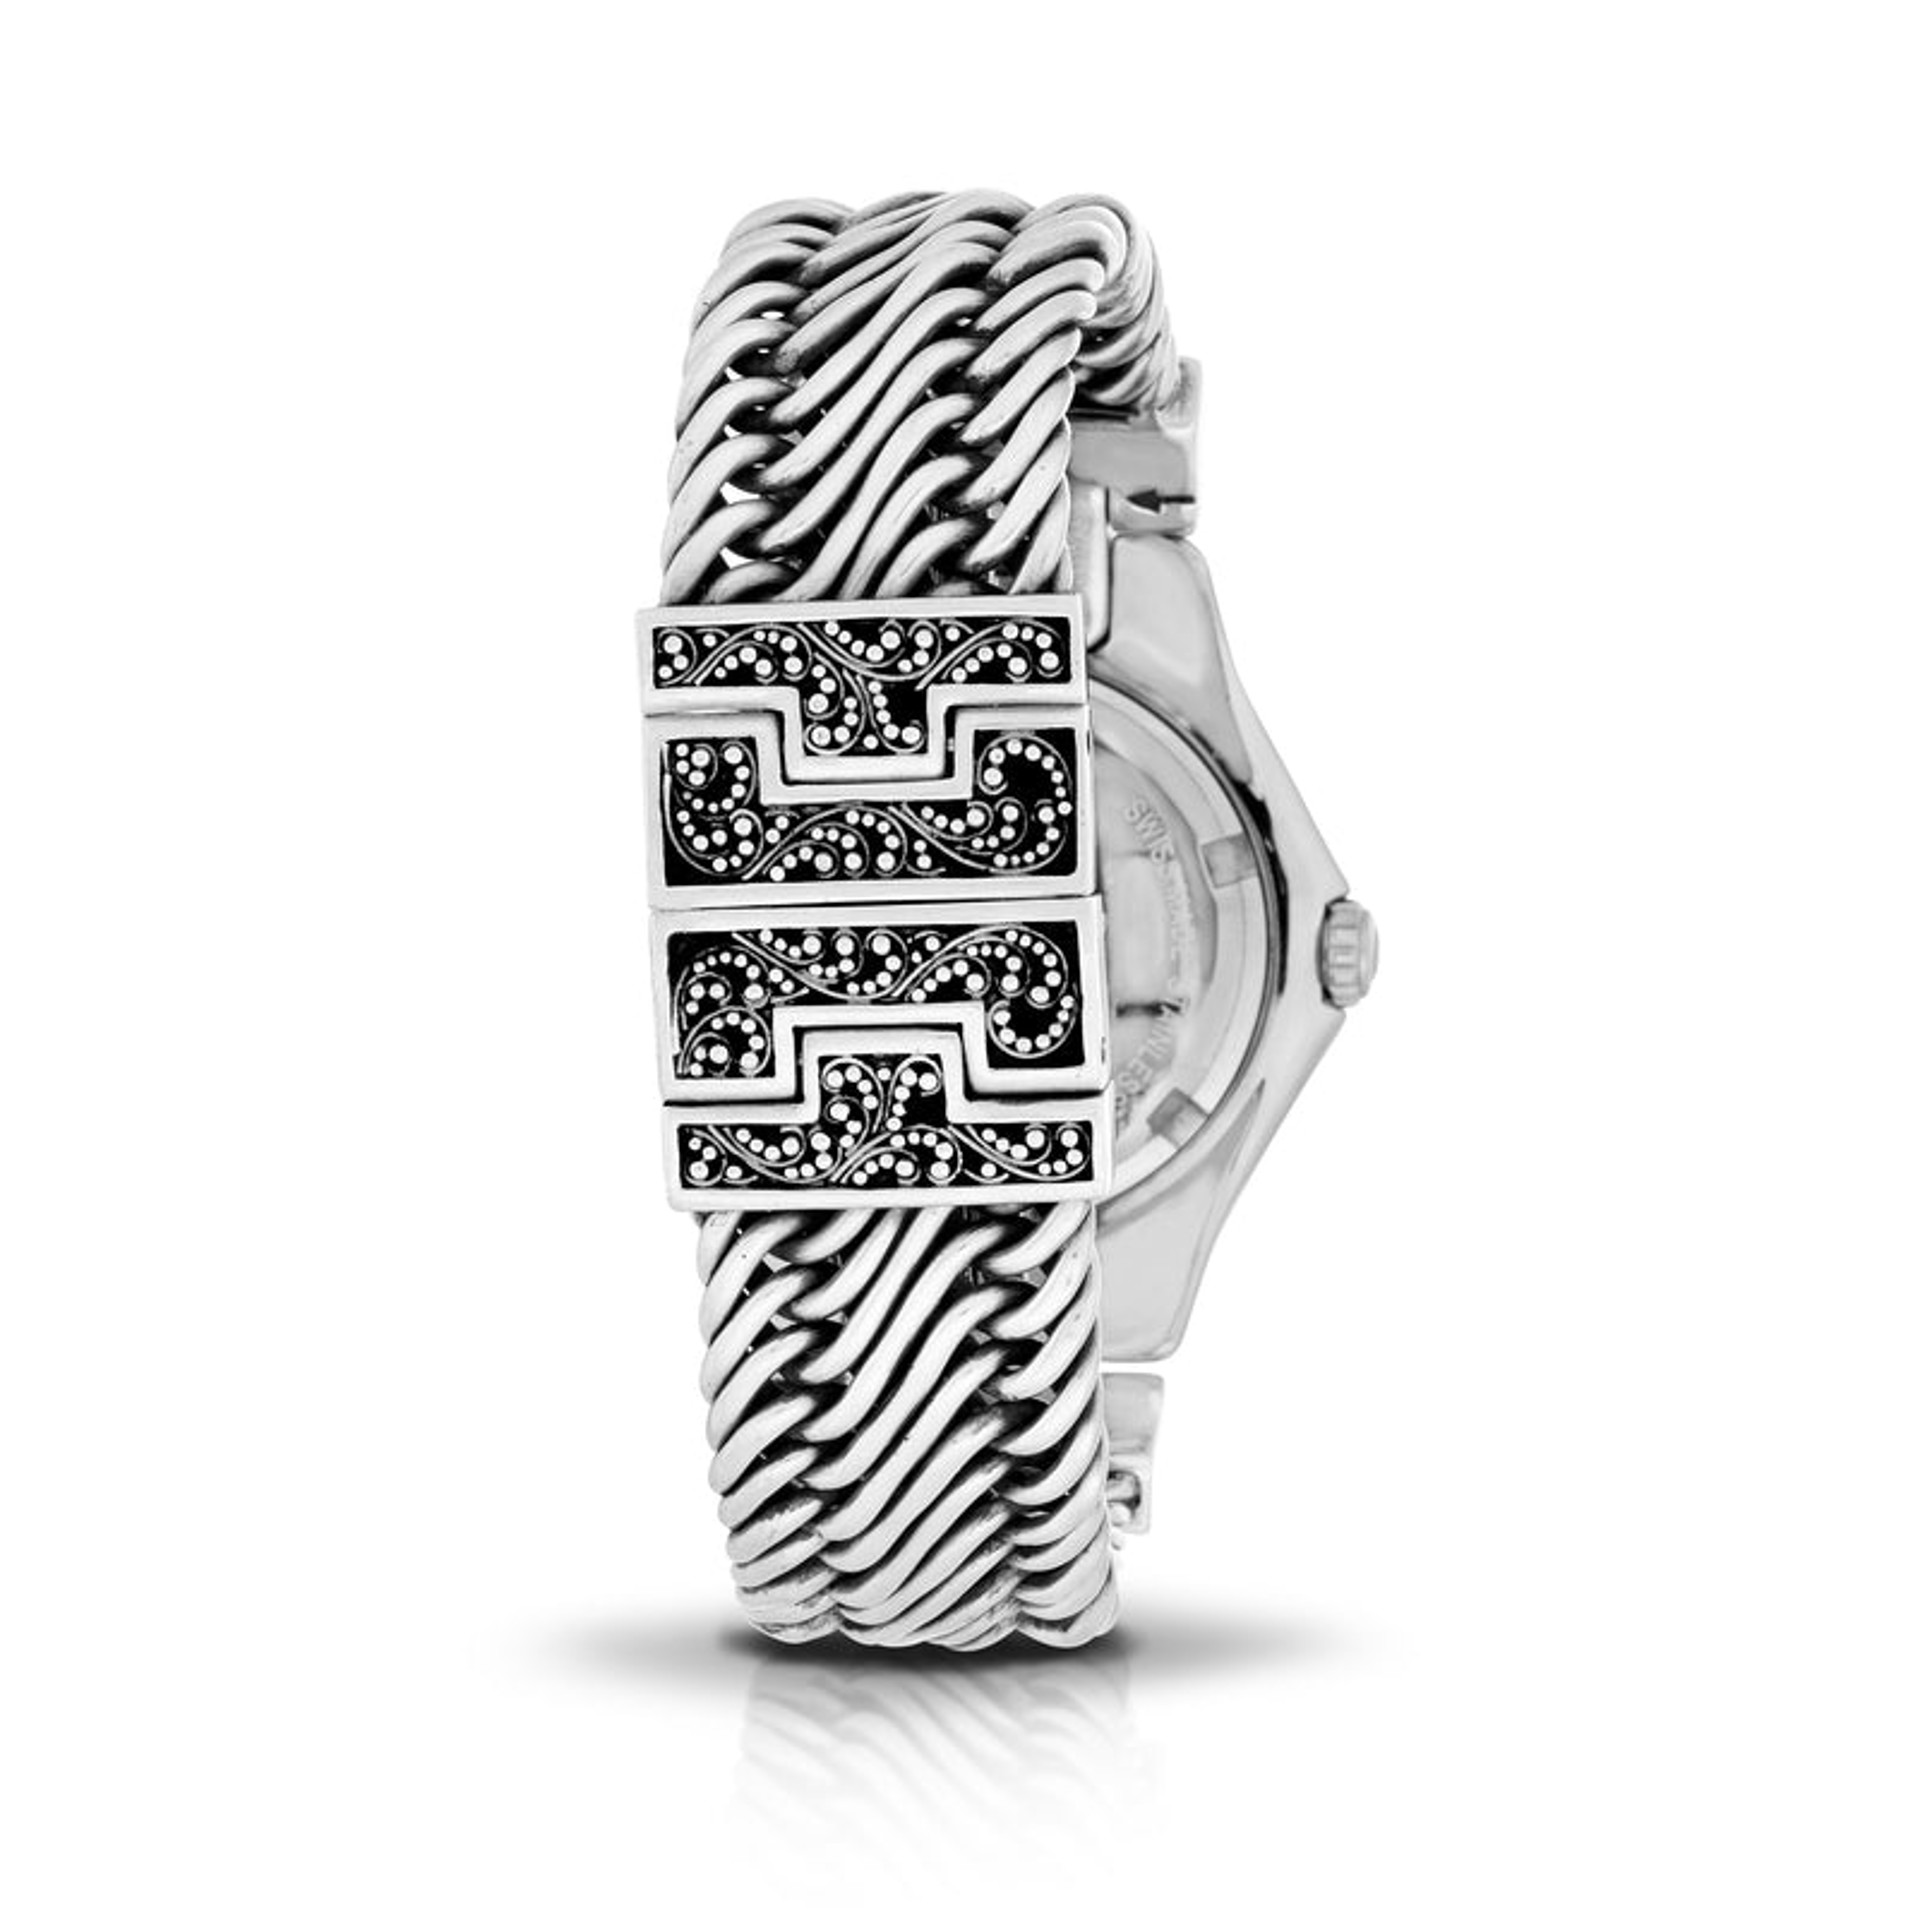 9765 Classic Women's Watch with Handwoven Sterling Silver Figure-8 Band by Lois Hill